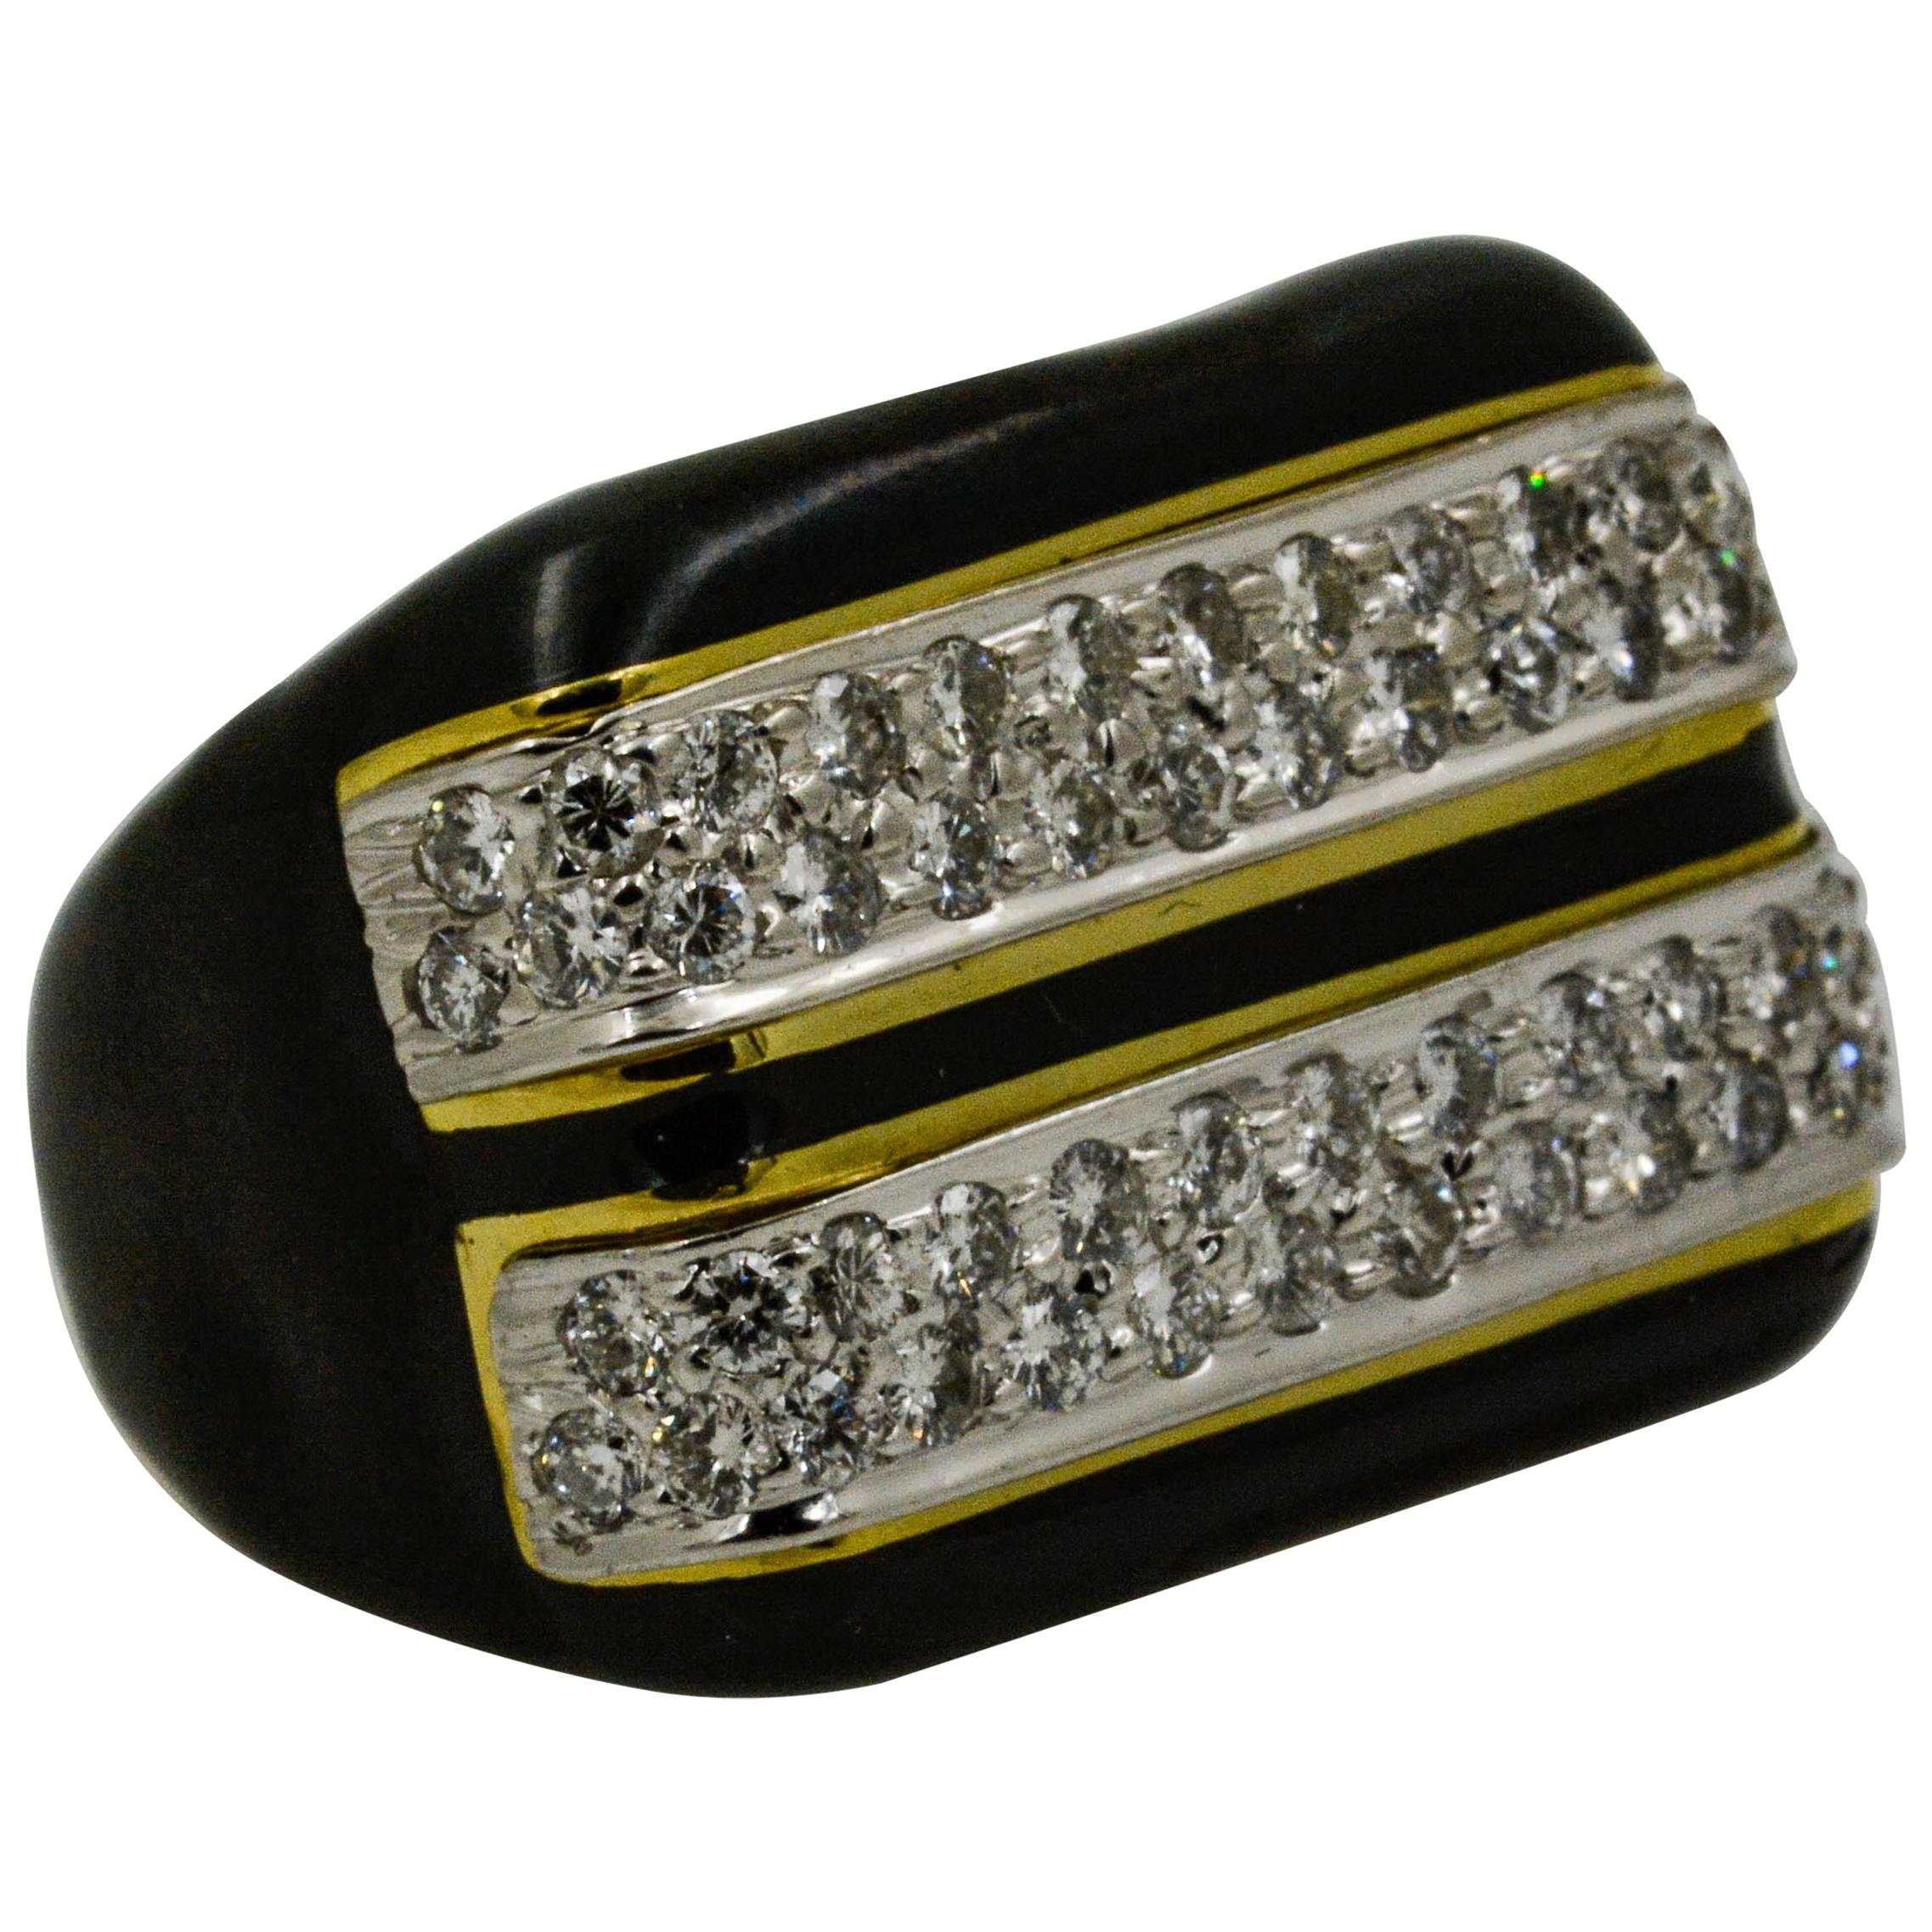 An 18 karat yellow gold ring set with round brilliant cut diamonds and accented with black enamel.  The ring is pave set with two rows of 54 round brilliant cut diamonds which weigh approximately 1.00 carat combined with G-H coloring and VS clarity.